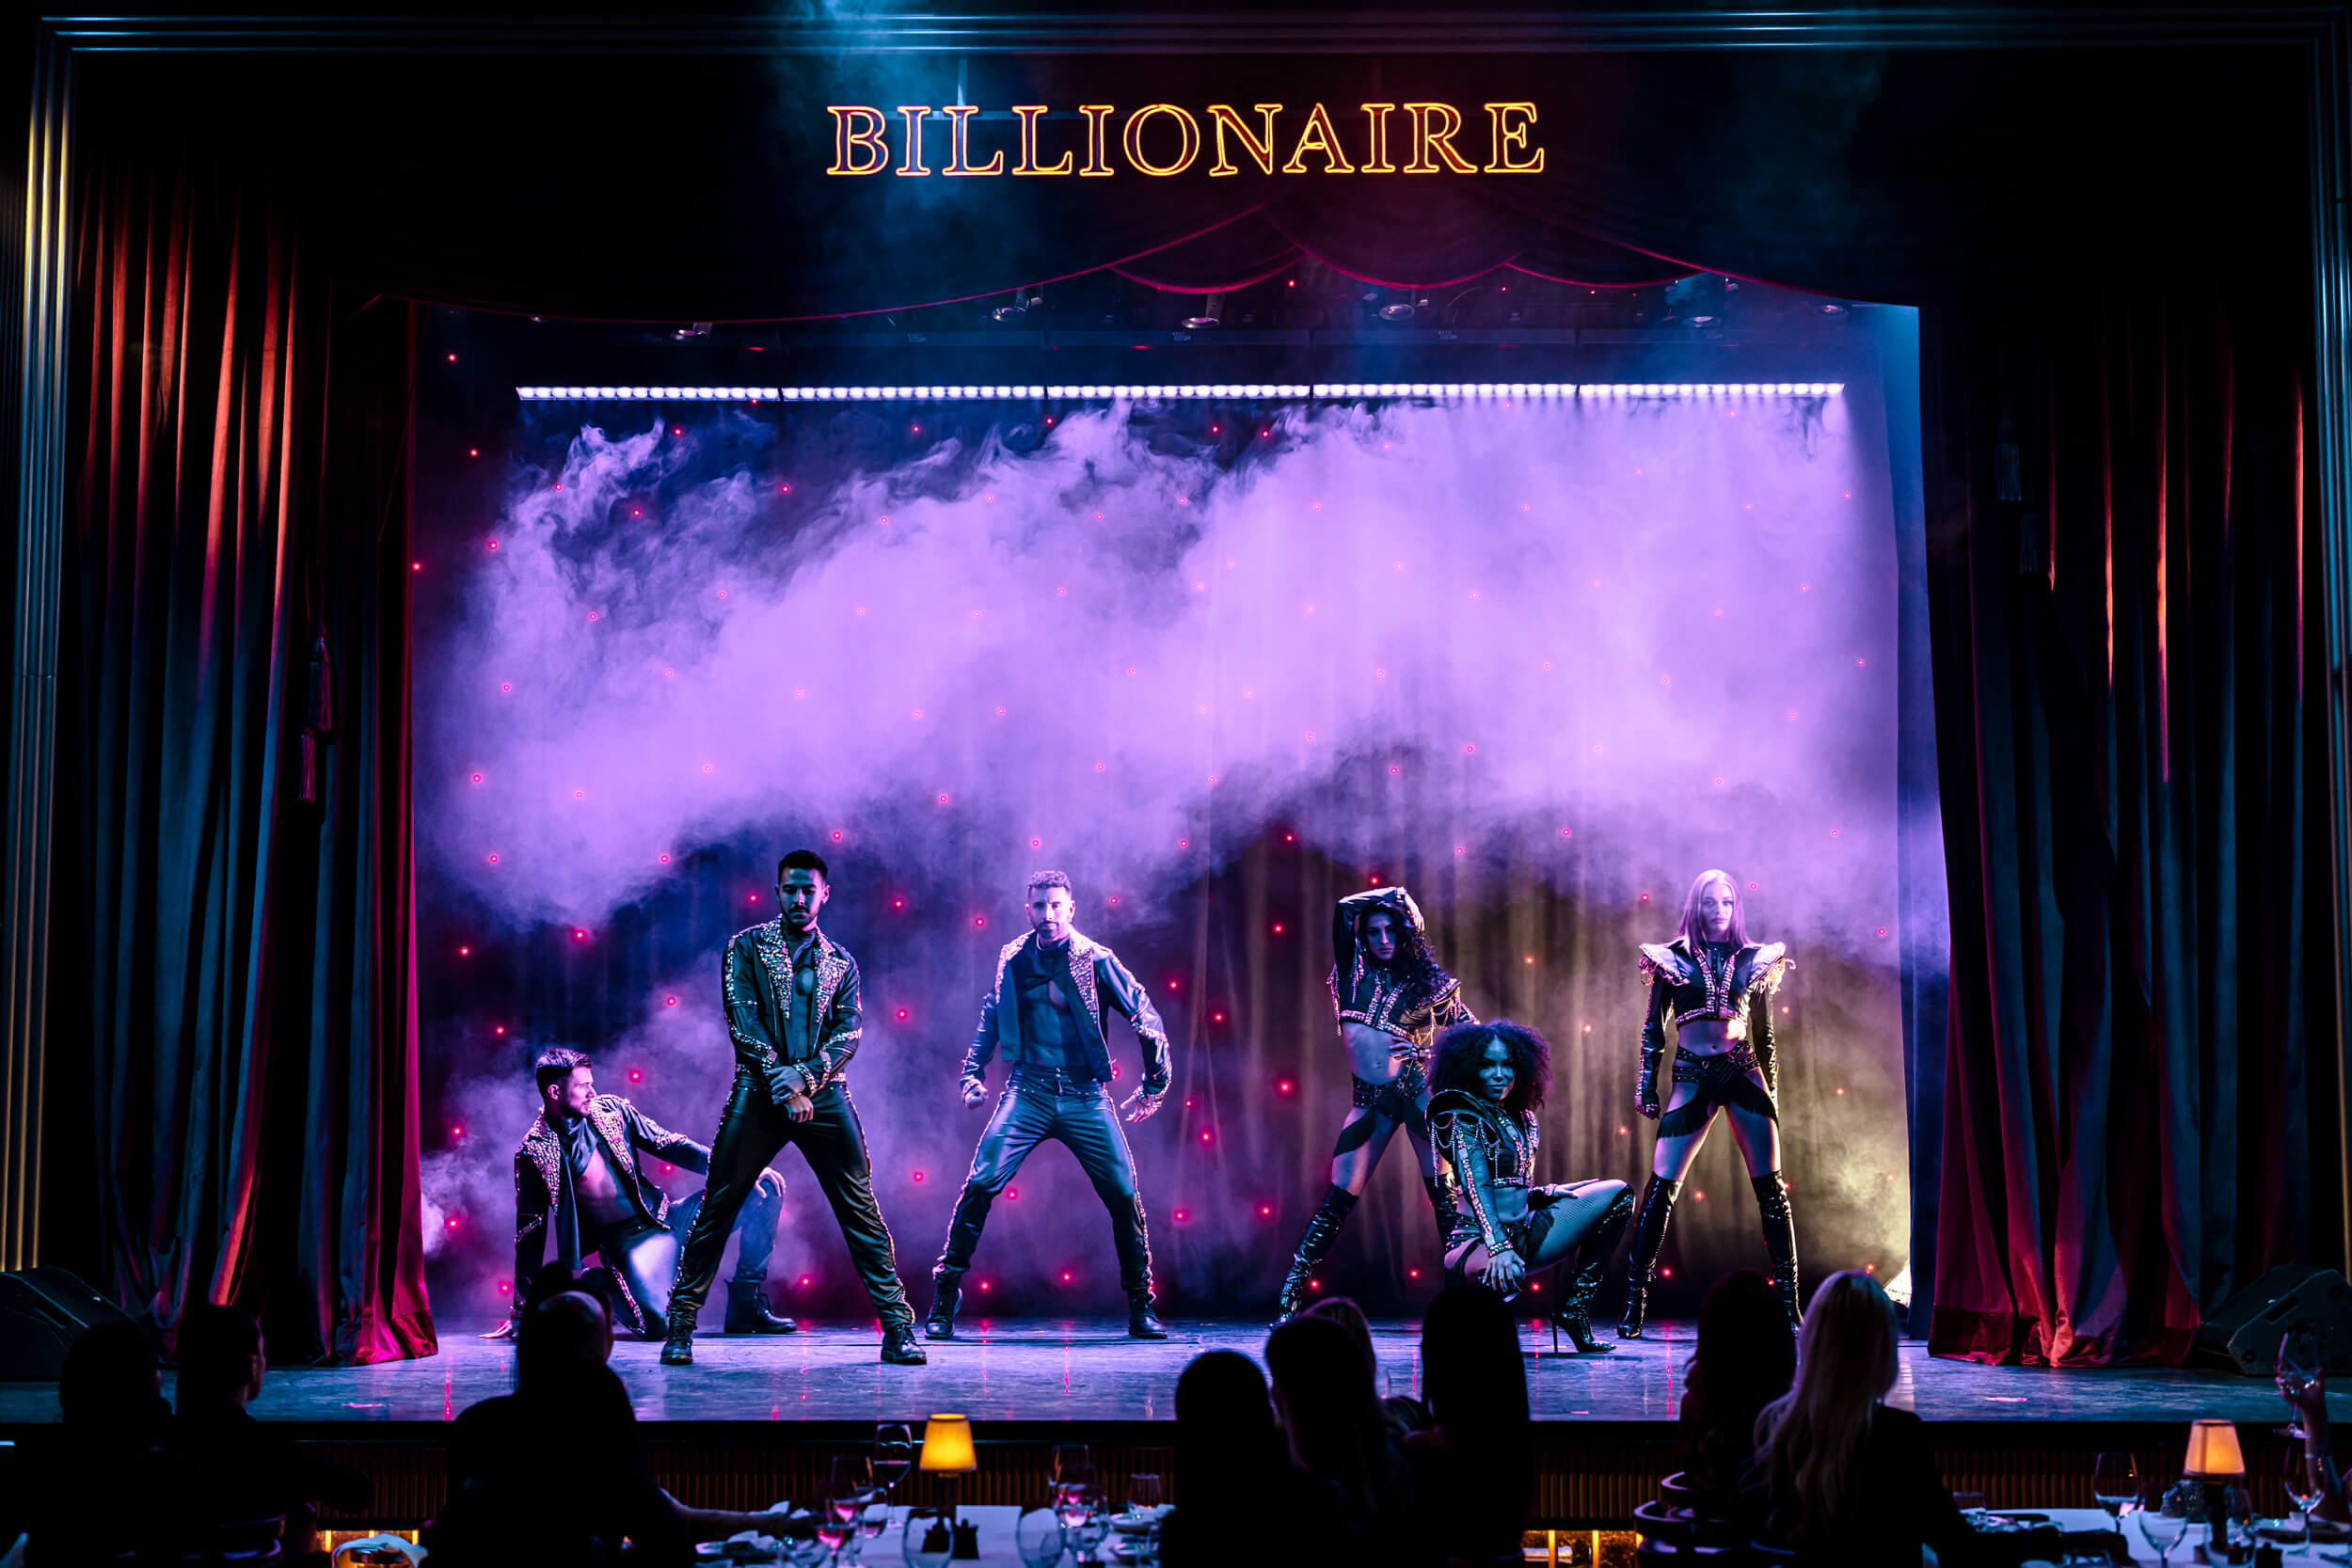 Billionaire performers on stage